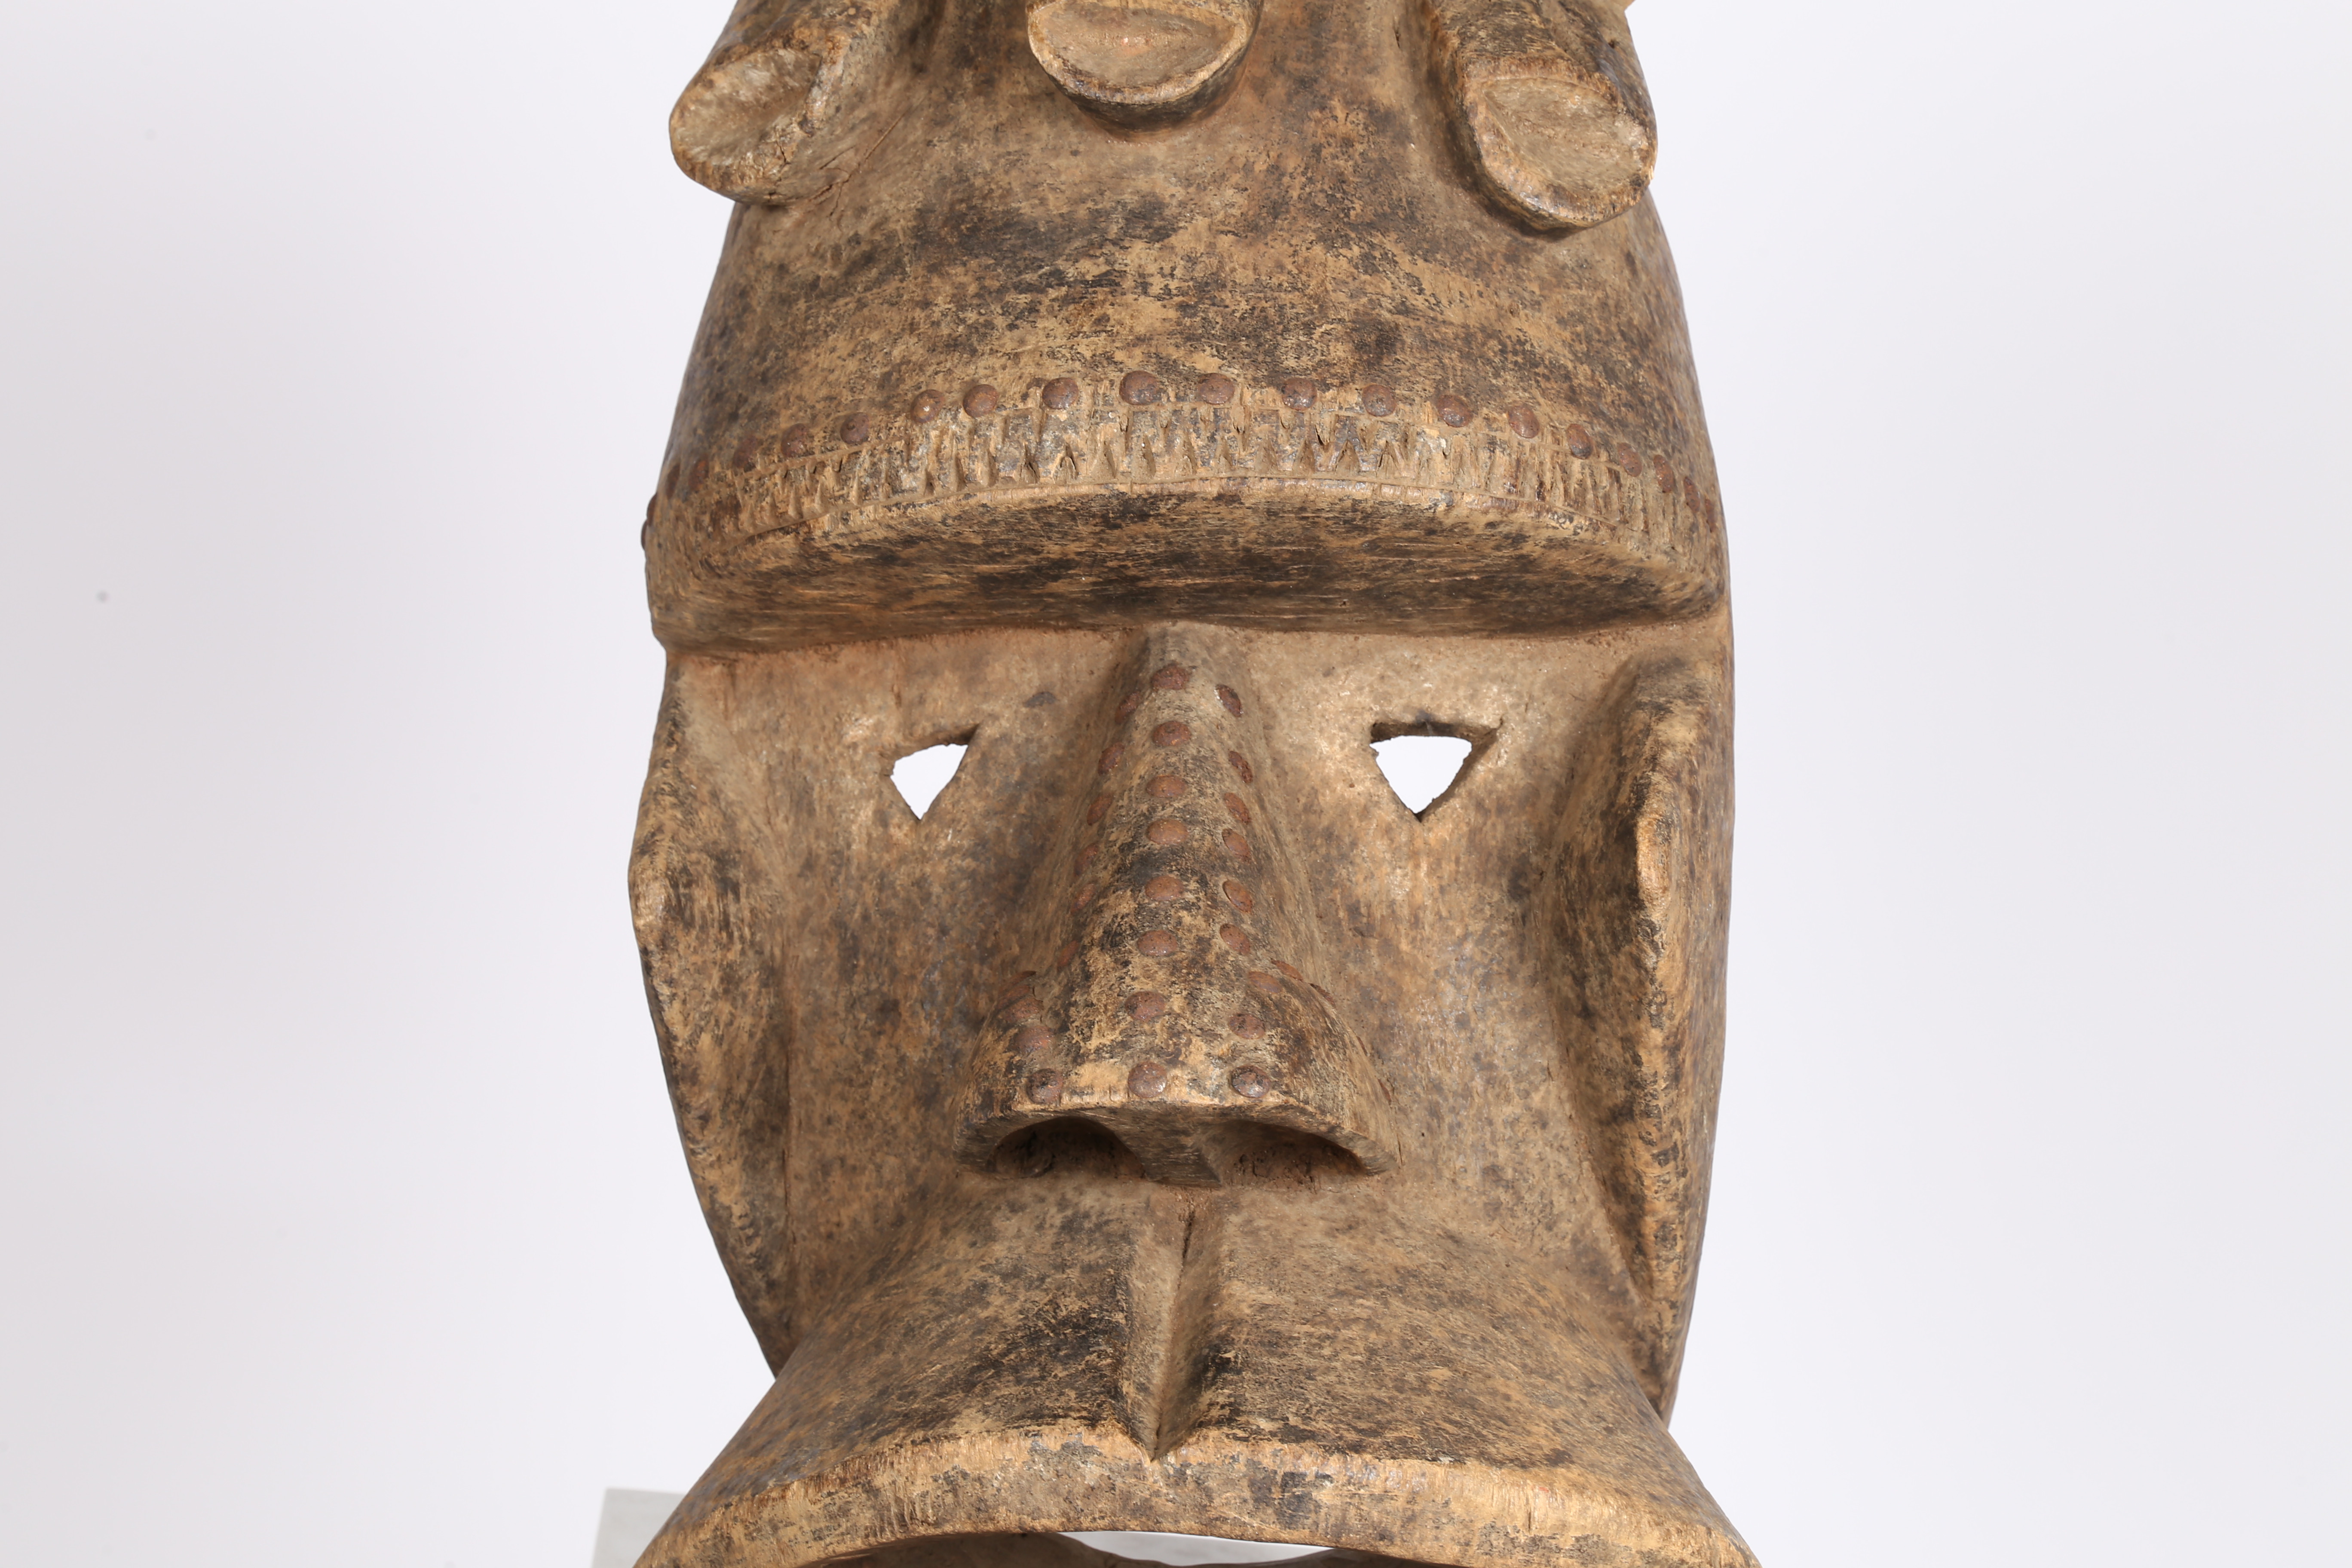 A EXTREMELY LARGE DAN KRAN MASK, LIBERIA. - Image 4 of 7